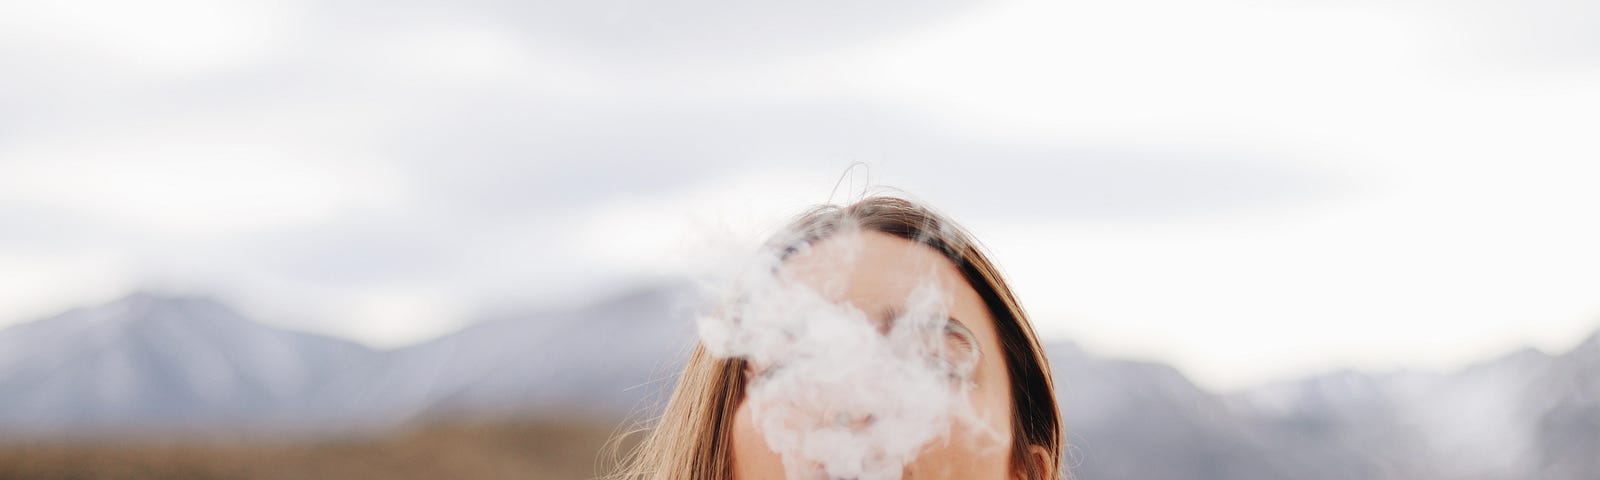 Woman blows a puff of smoke into the air while standing in front of a mountain landscape.